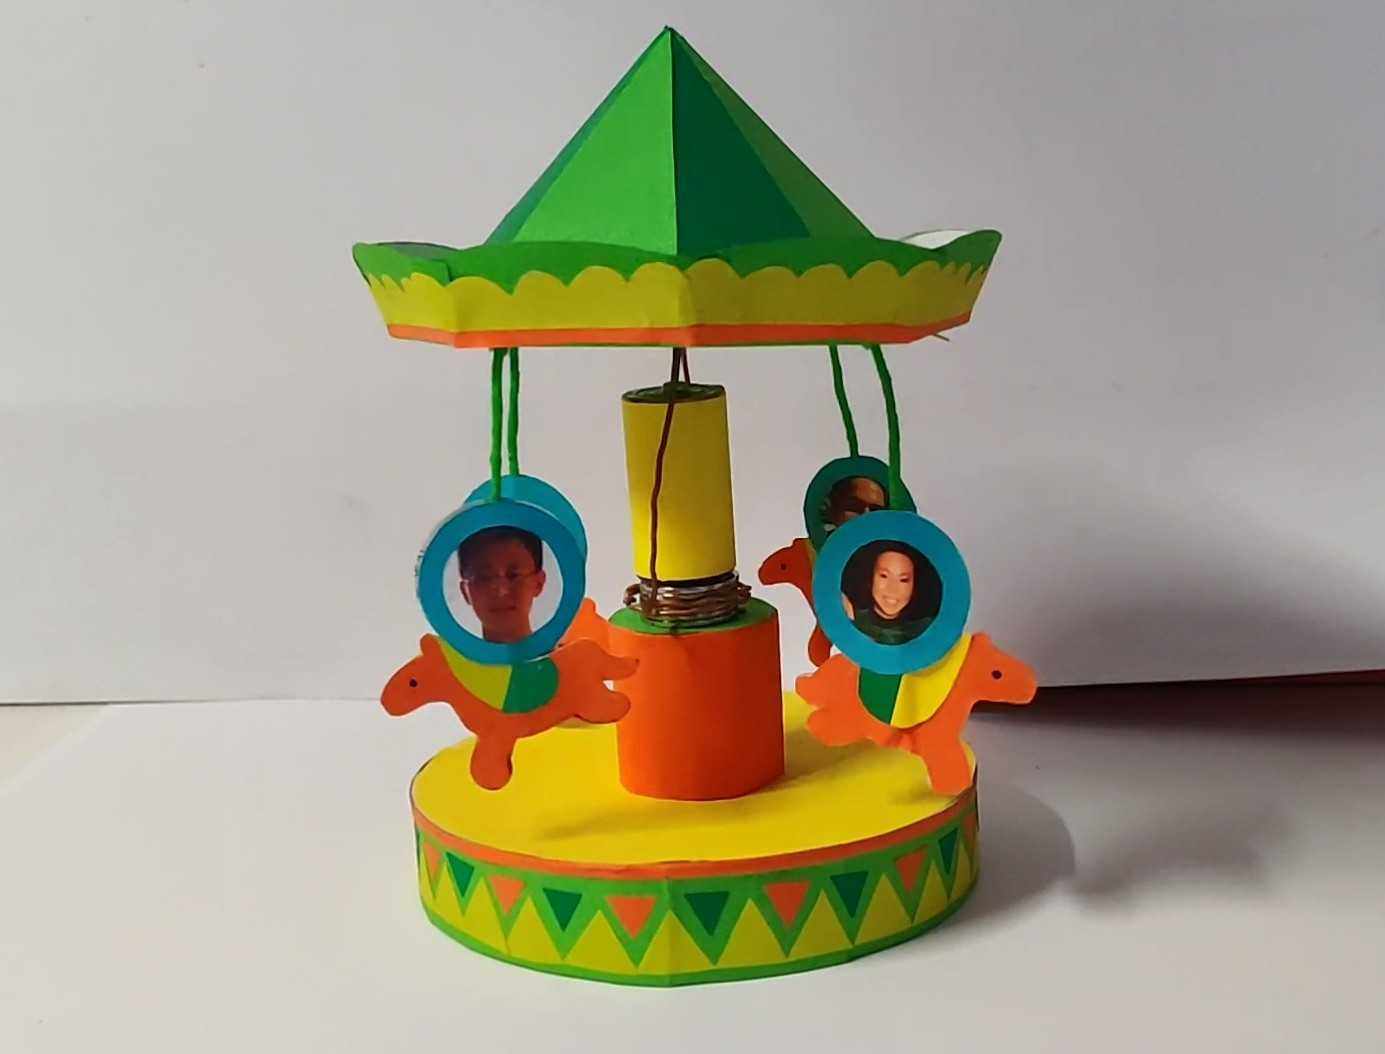 Learn Easy to Make a Merry-Go-Round Paper Crafts Activity 